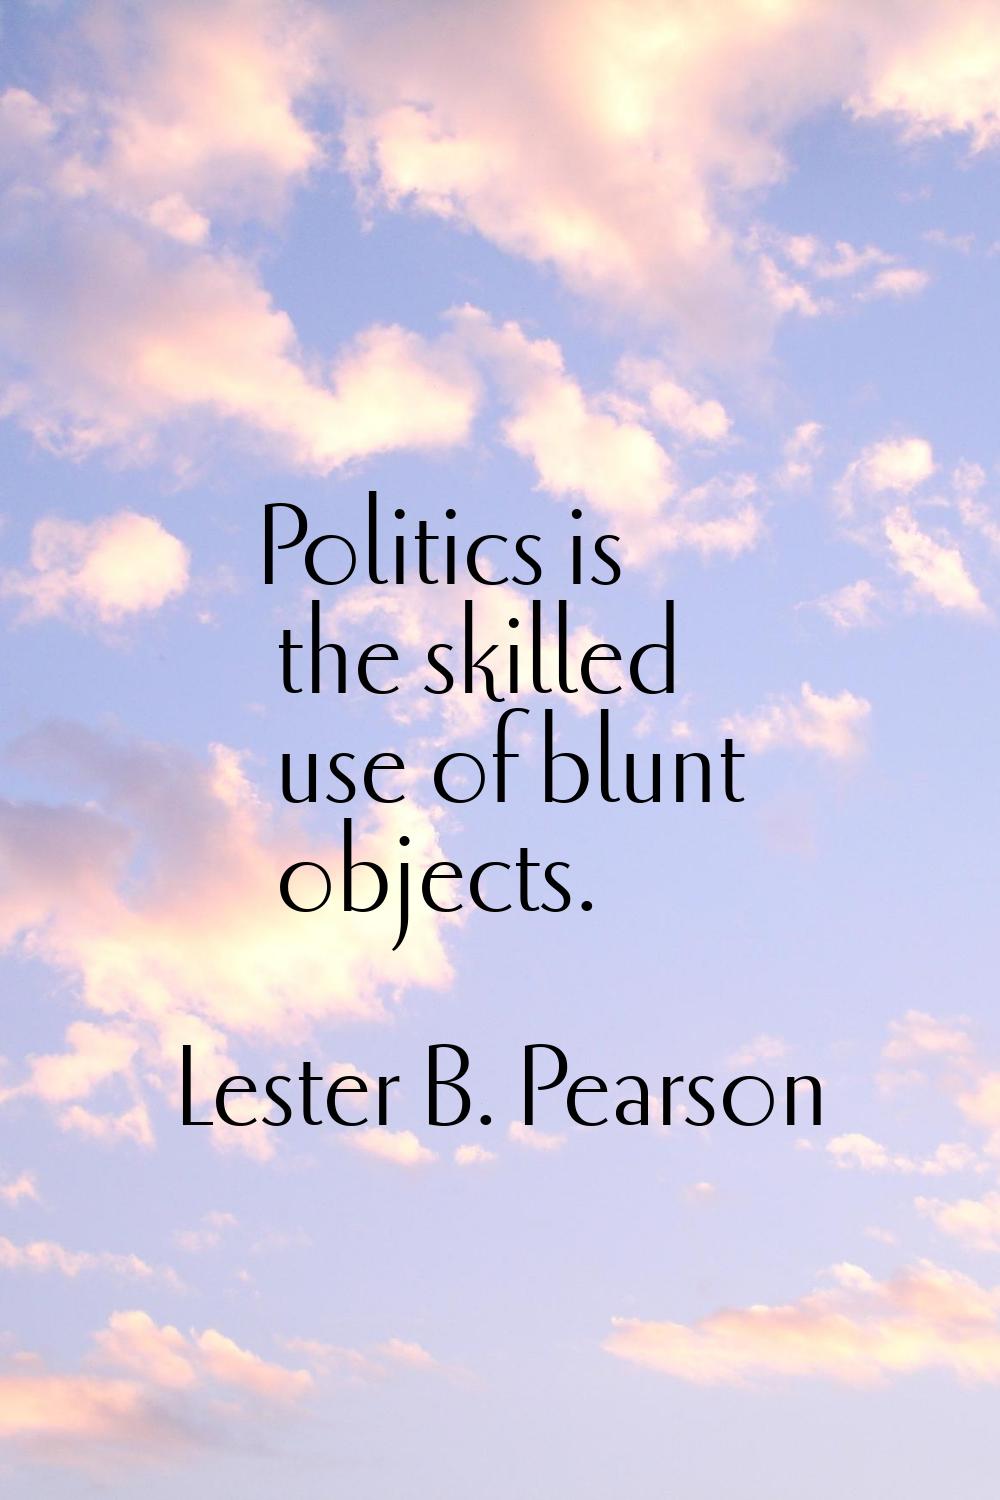 Politics is the skilled use of blunt objects.